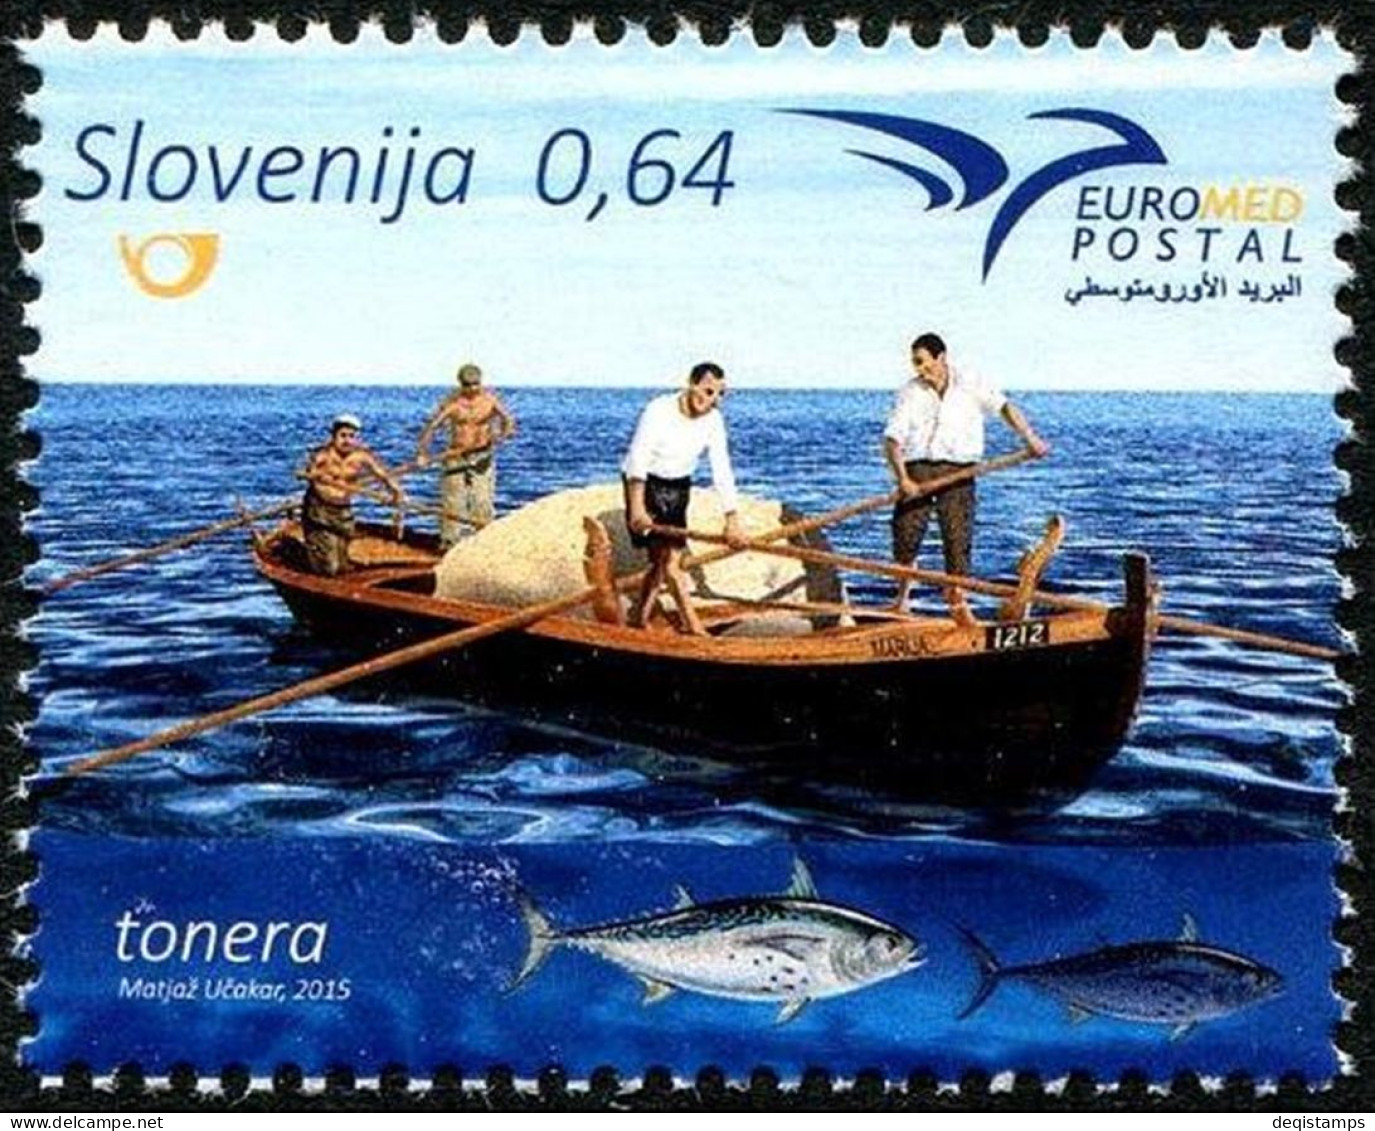 Slovenia Year 2015 Stamp - Fishing Boat EUROMED Issue - Slovénie